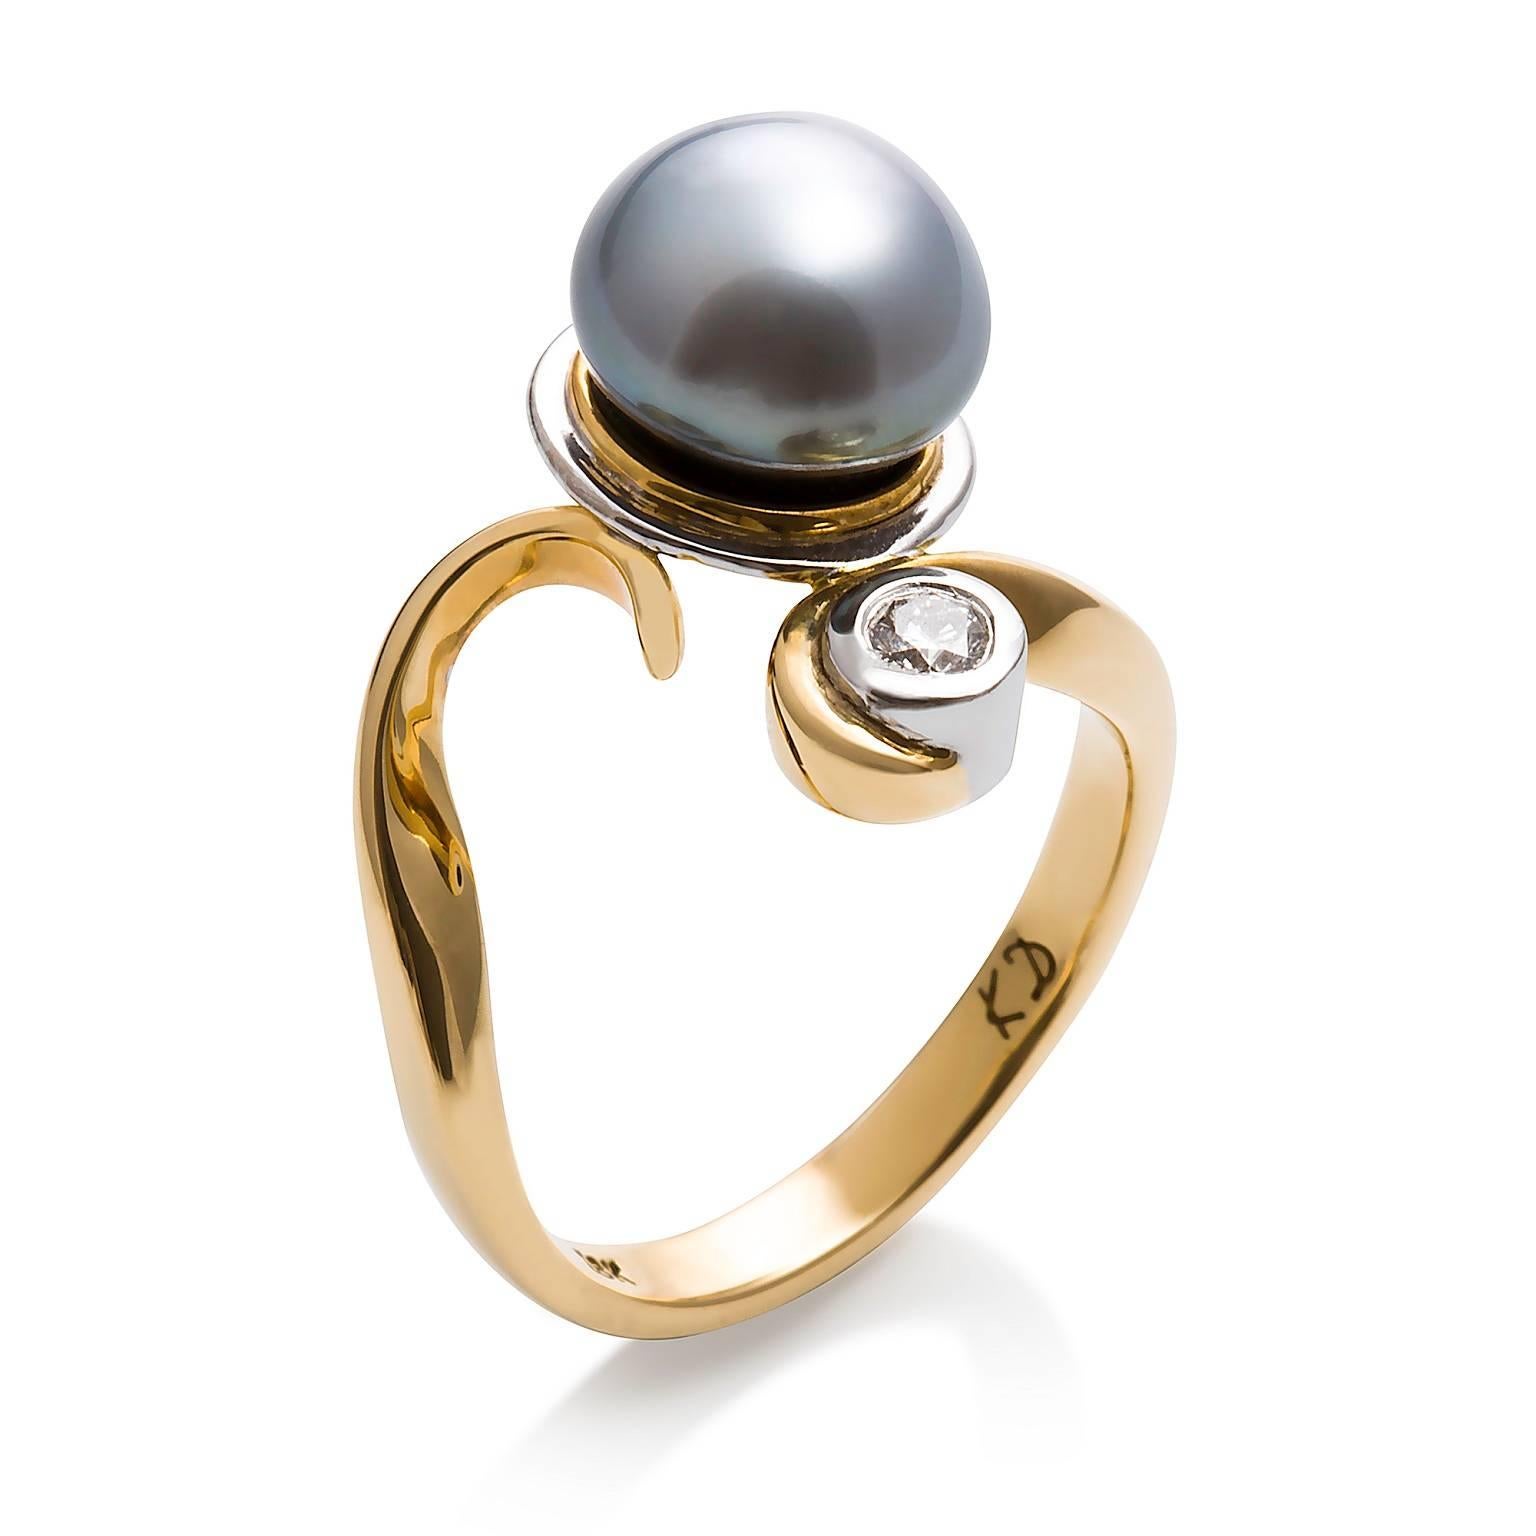 Silver Perla & Diamante Ring

This beautiful hand-made dress ring has a yellow gold band and white gold settings of Tahitian pearl and diamond.

Tahitian pearl: silver colour, 10.26mm

Round brilliant cut diamond: G colour, VS clarity, 3.5mm,